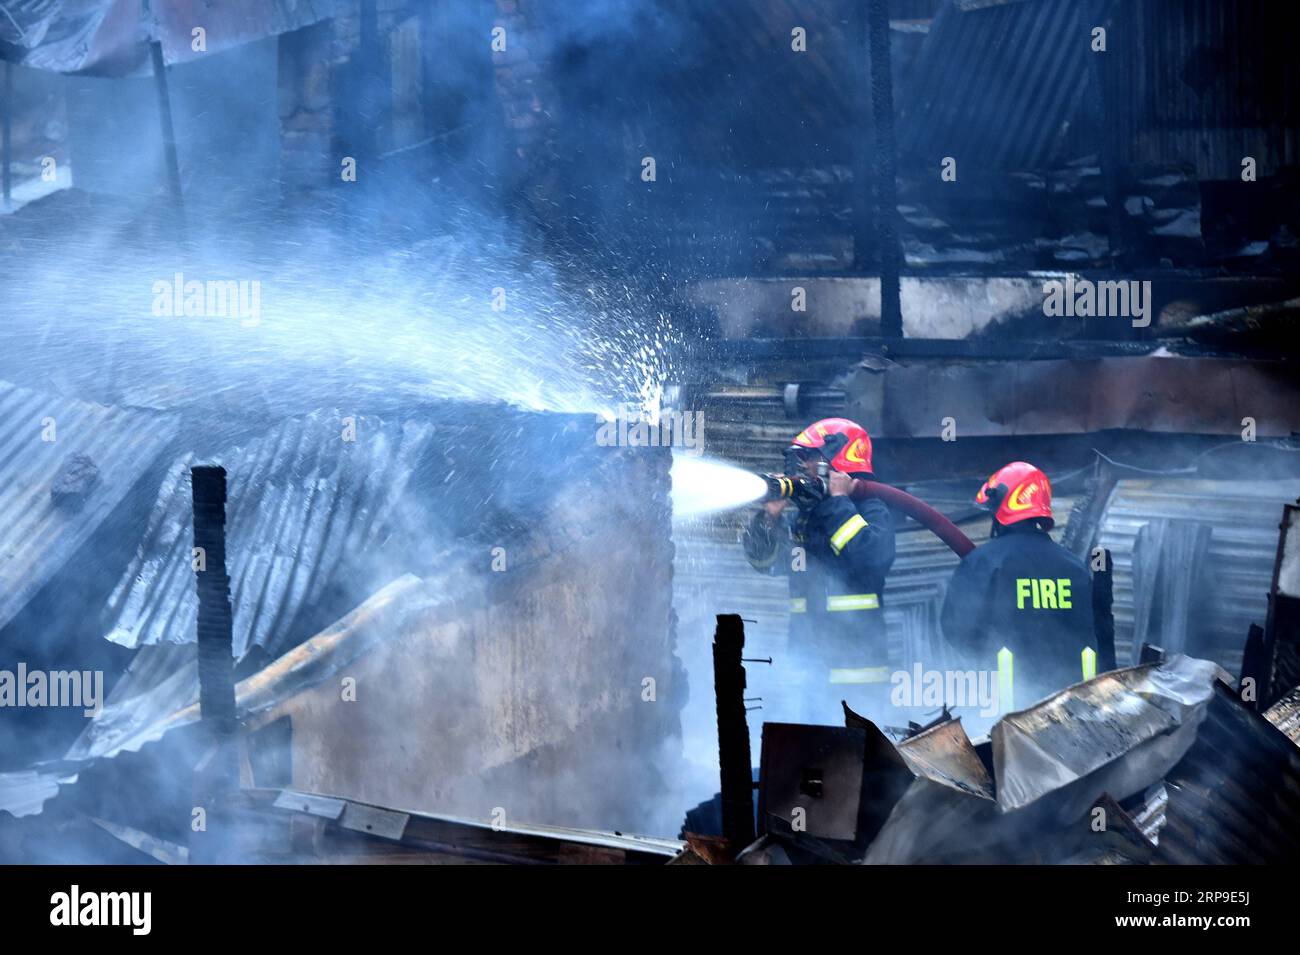 (190404) -- DHAKA, April 4, 2019 -- Firefighters spray water to douse flame after a fire broke out at a kitchen market in Dhaka, Bangladesh, April 4, 2019. An early morning fire gutted dozens of shops in a kitchen market in Bangladesh capital Dhaka on Thursday, Kazi Nazmuzzaman, deputy assistant director of Fire Service and Civil Defense, told Xinhua. ) BANGLADESH-DHAKA-KITCHEN MARKET-FIRE Stringer PUBLICATIONxNOTxINxCHN Stock Photo